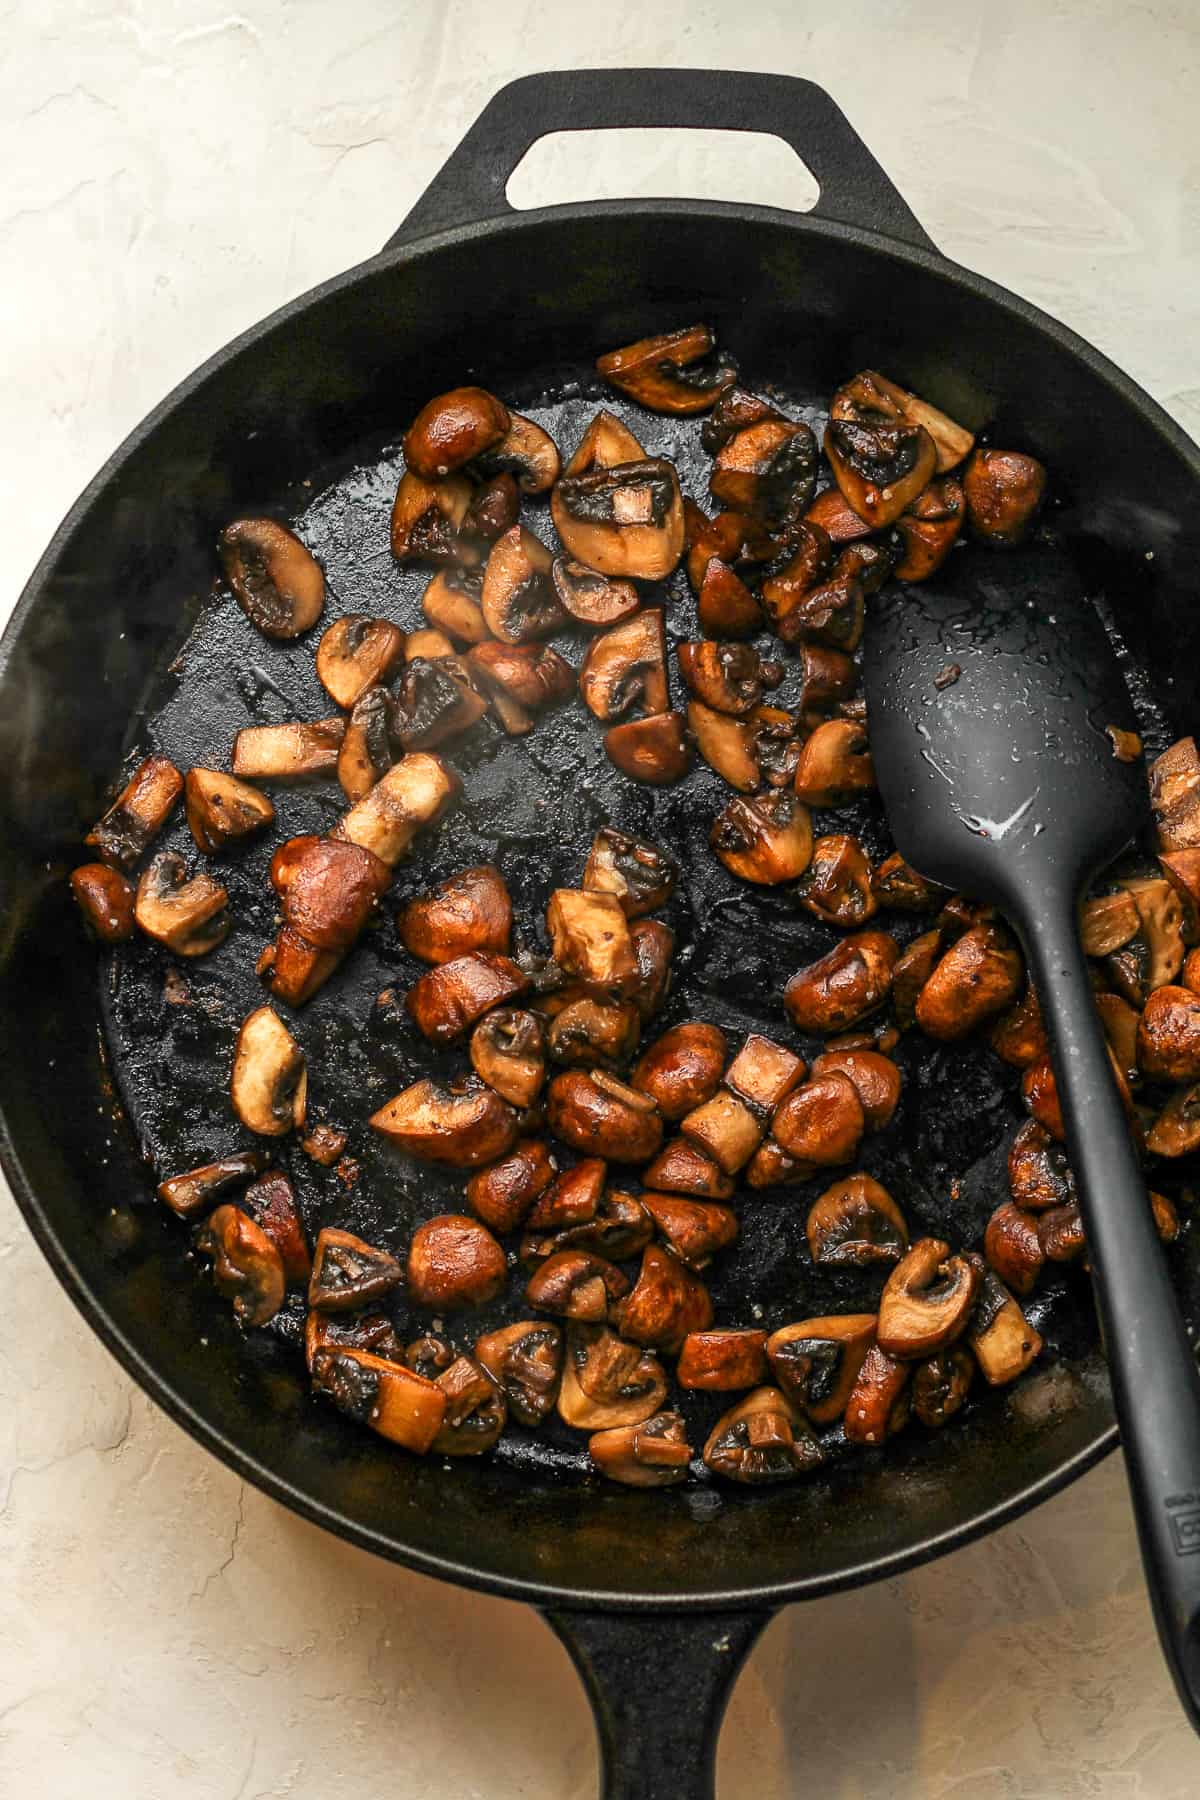 A skillet of the browned mushrooms.